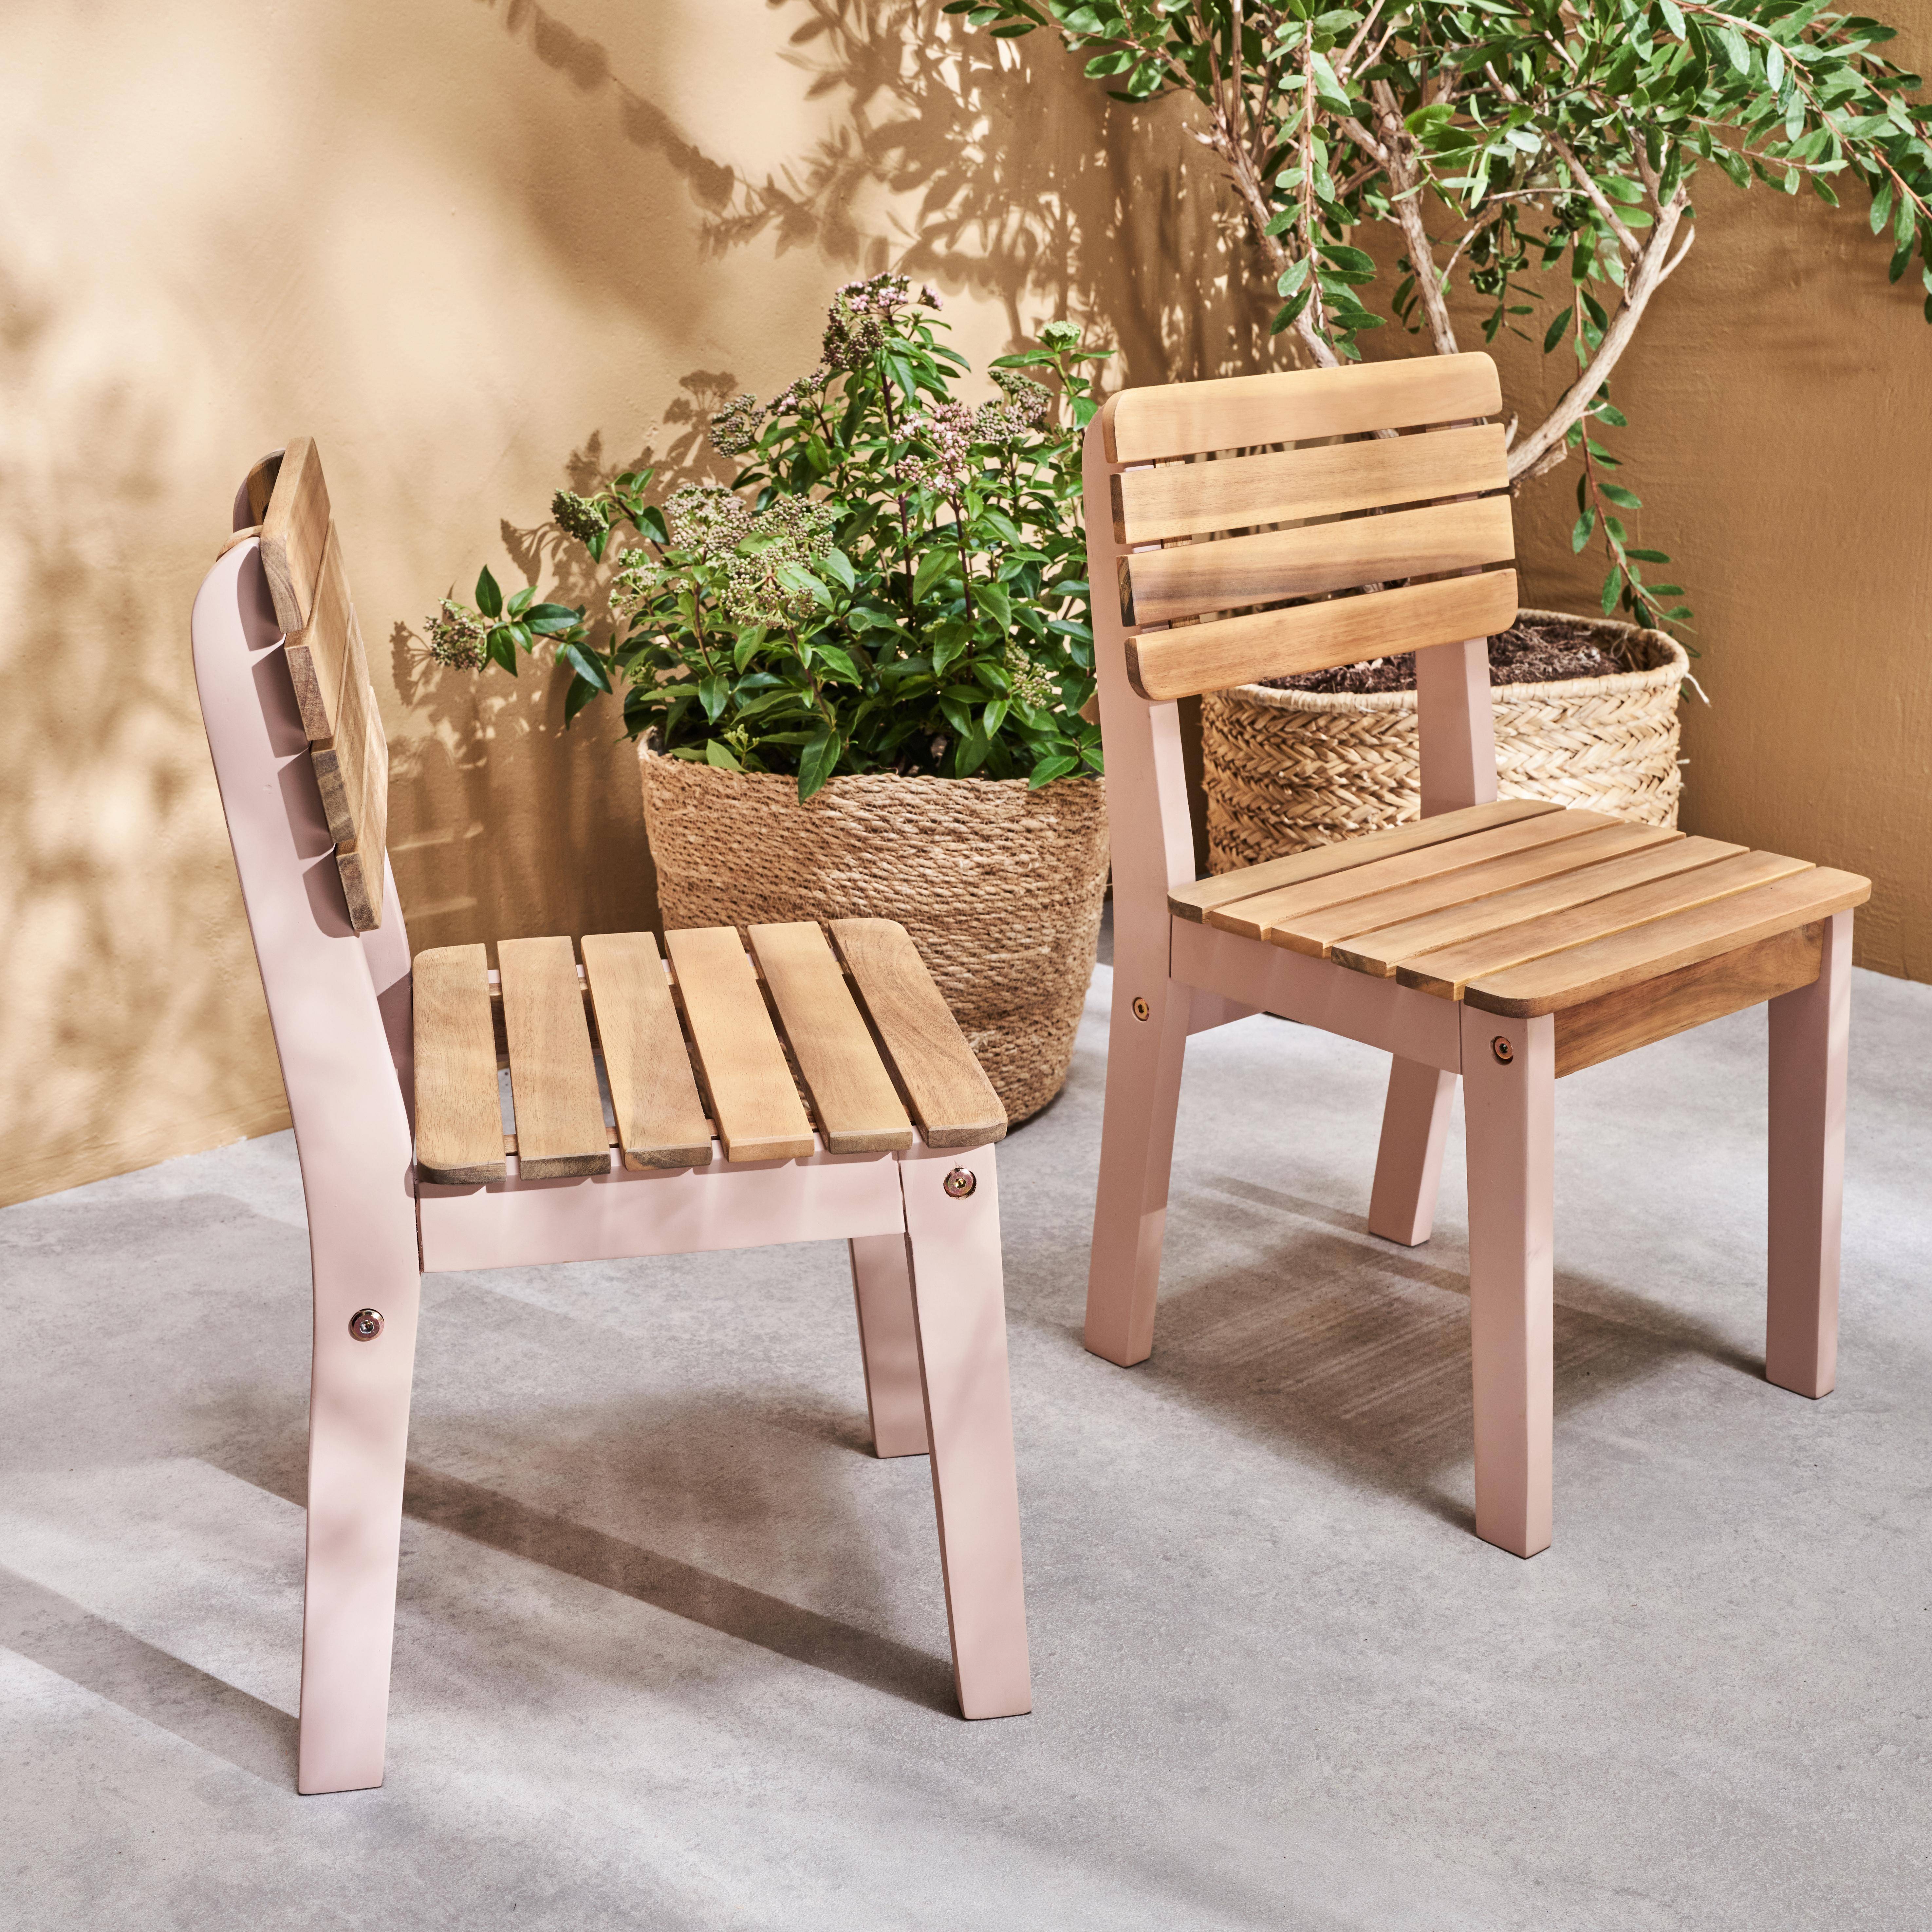 Solid Wood Chairs for Children, Indoor/Outdoor (Set of 2), pink, L29 x D31.5 x H53 cm,sweeek,Photo1